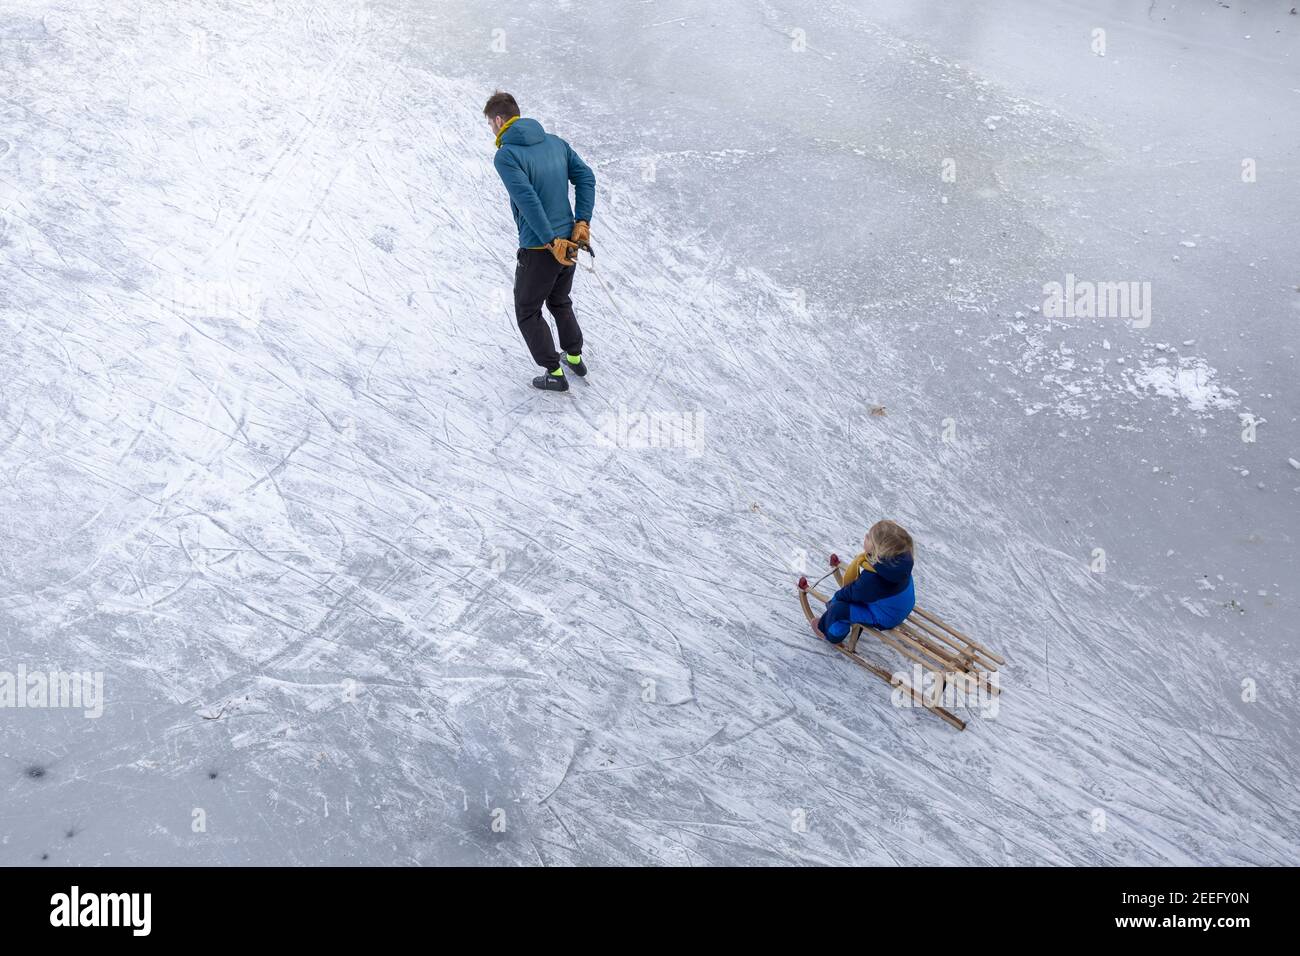 ZUTPHEN, NETHERLANDS - Feb 14, 2021: Father ice skating holding a rope dragging a child on a sled on frozen river seen from above with marks in the ic Stock Photo